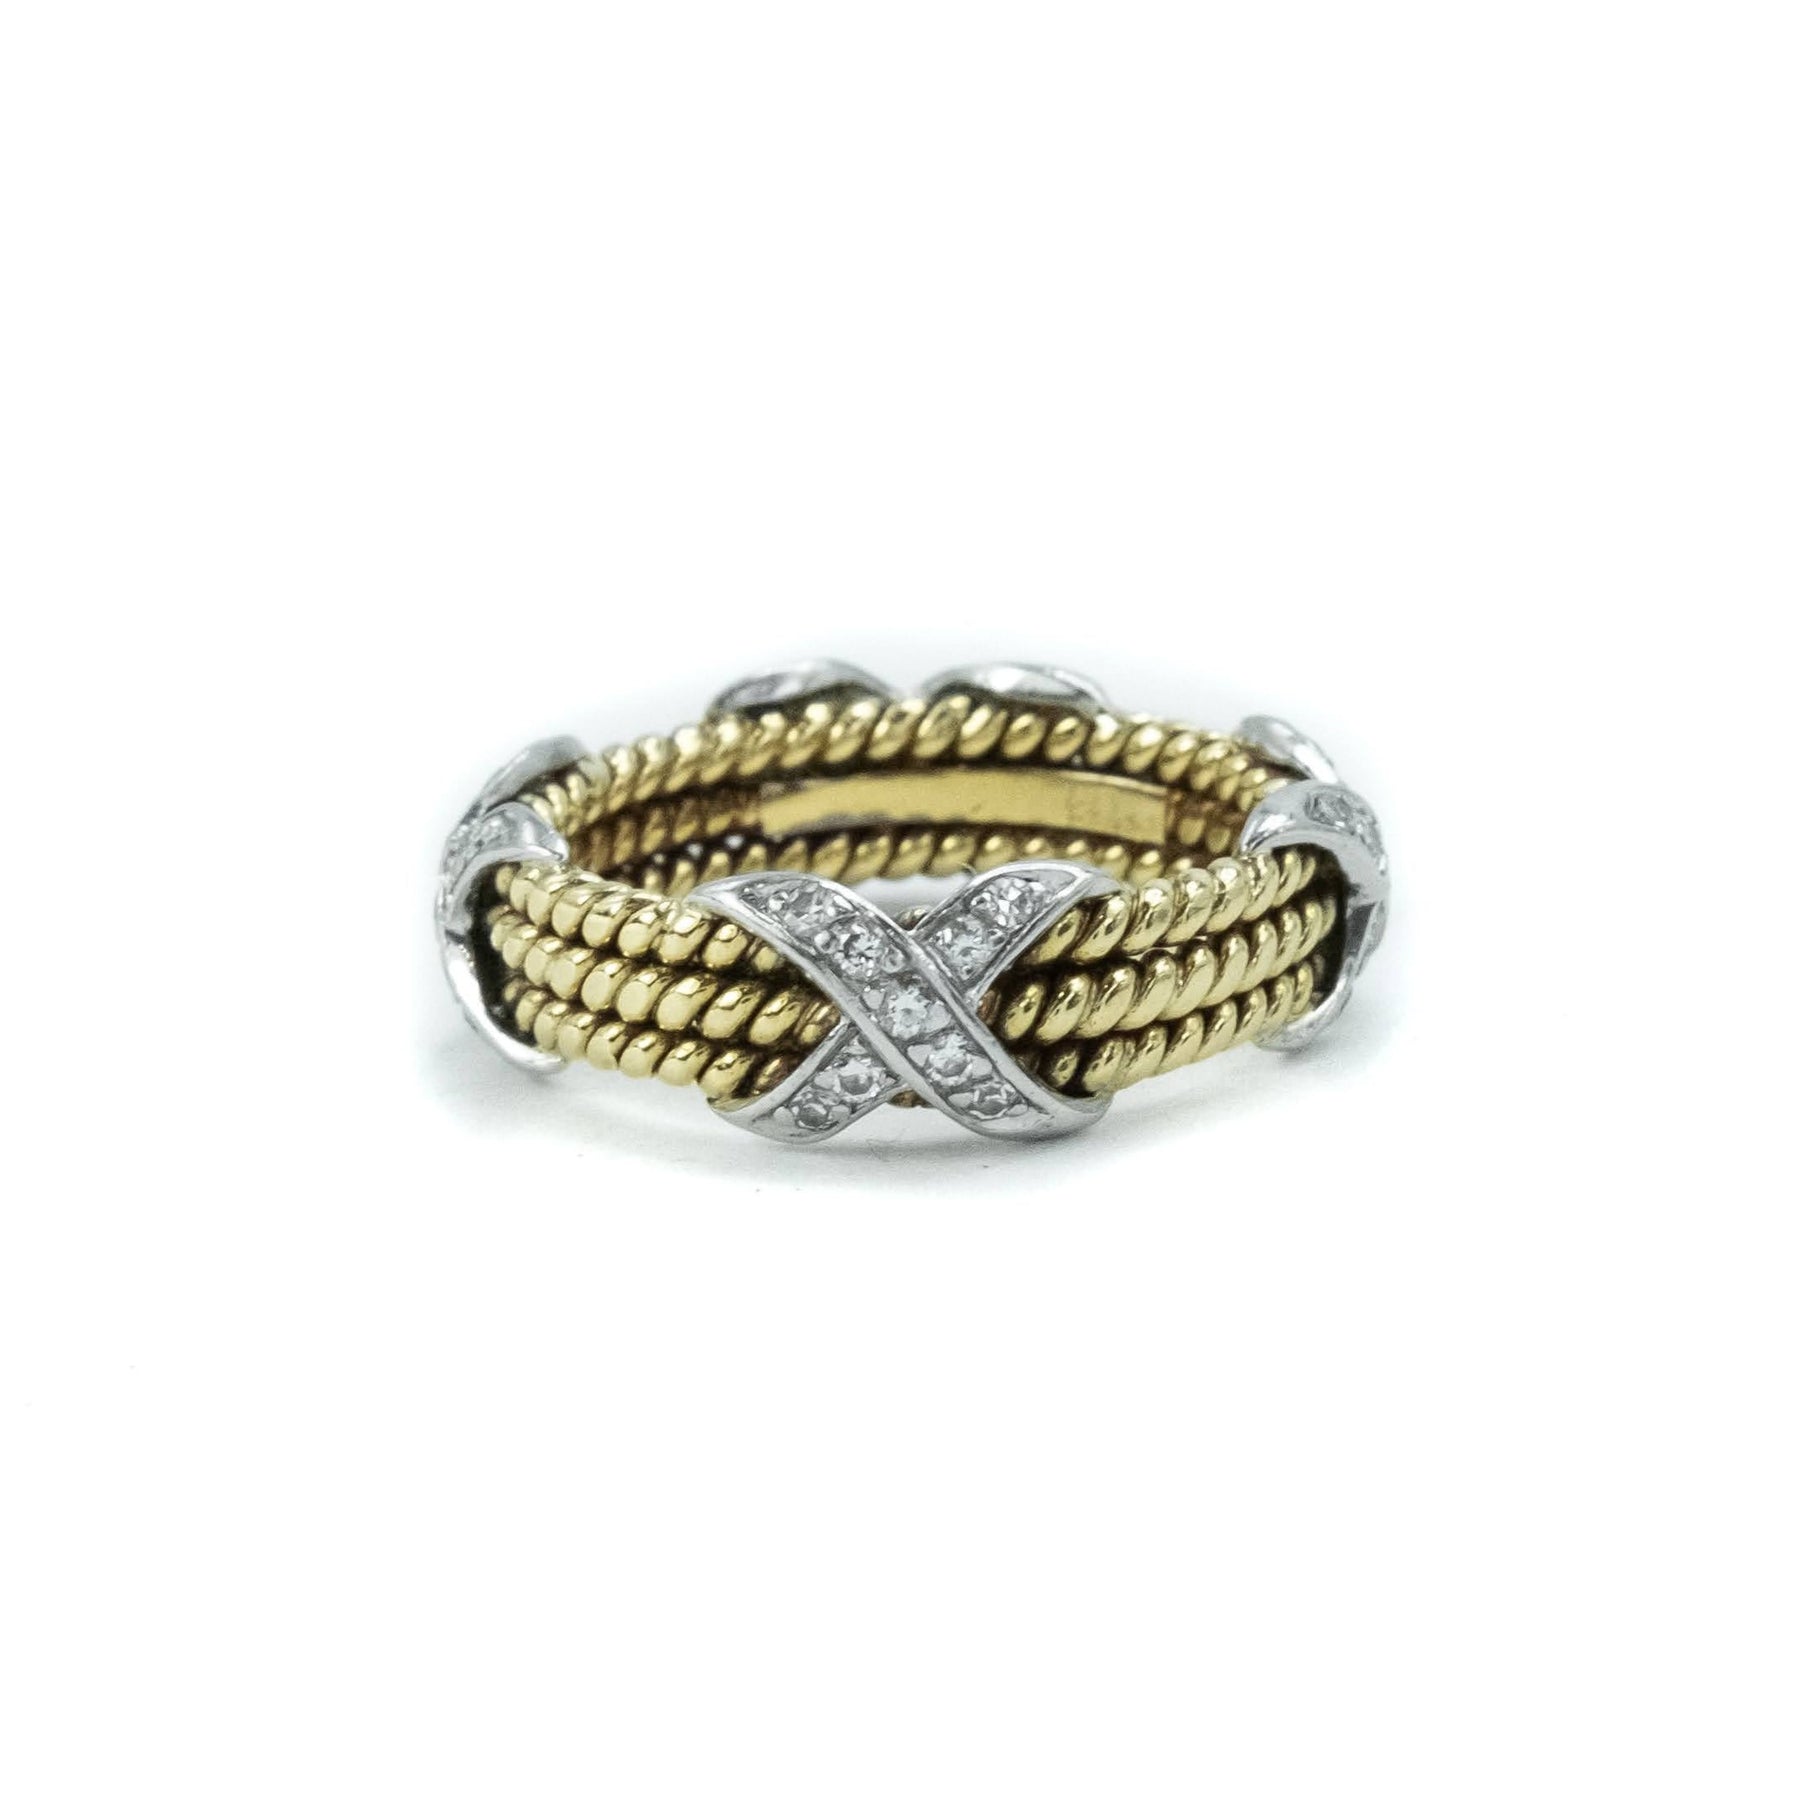 Tiffany Fleur de Lis band ring in 18k rose gold with diamonds, extra mini.  | Tiffany & Co.